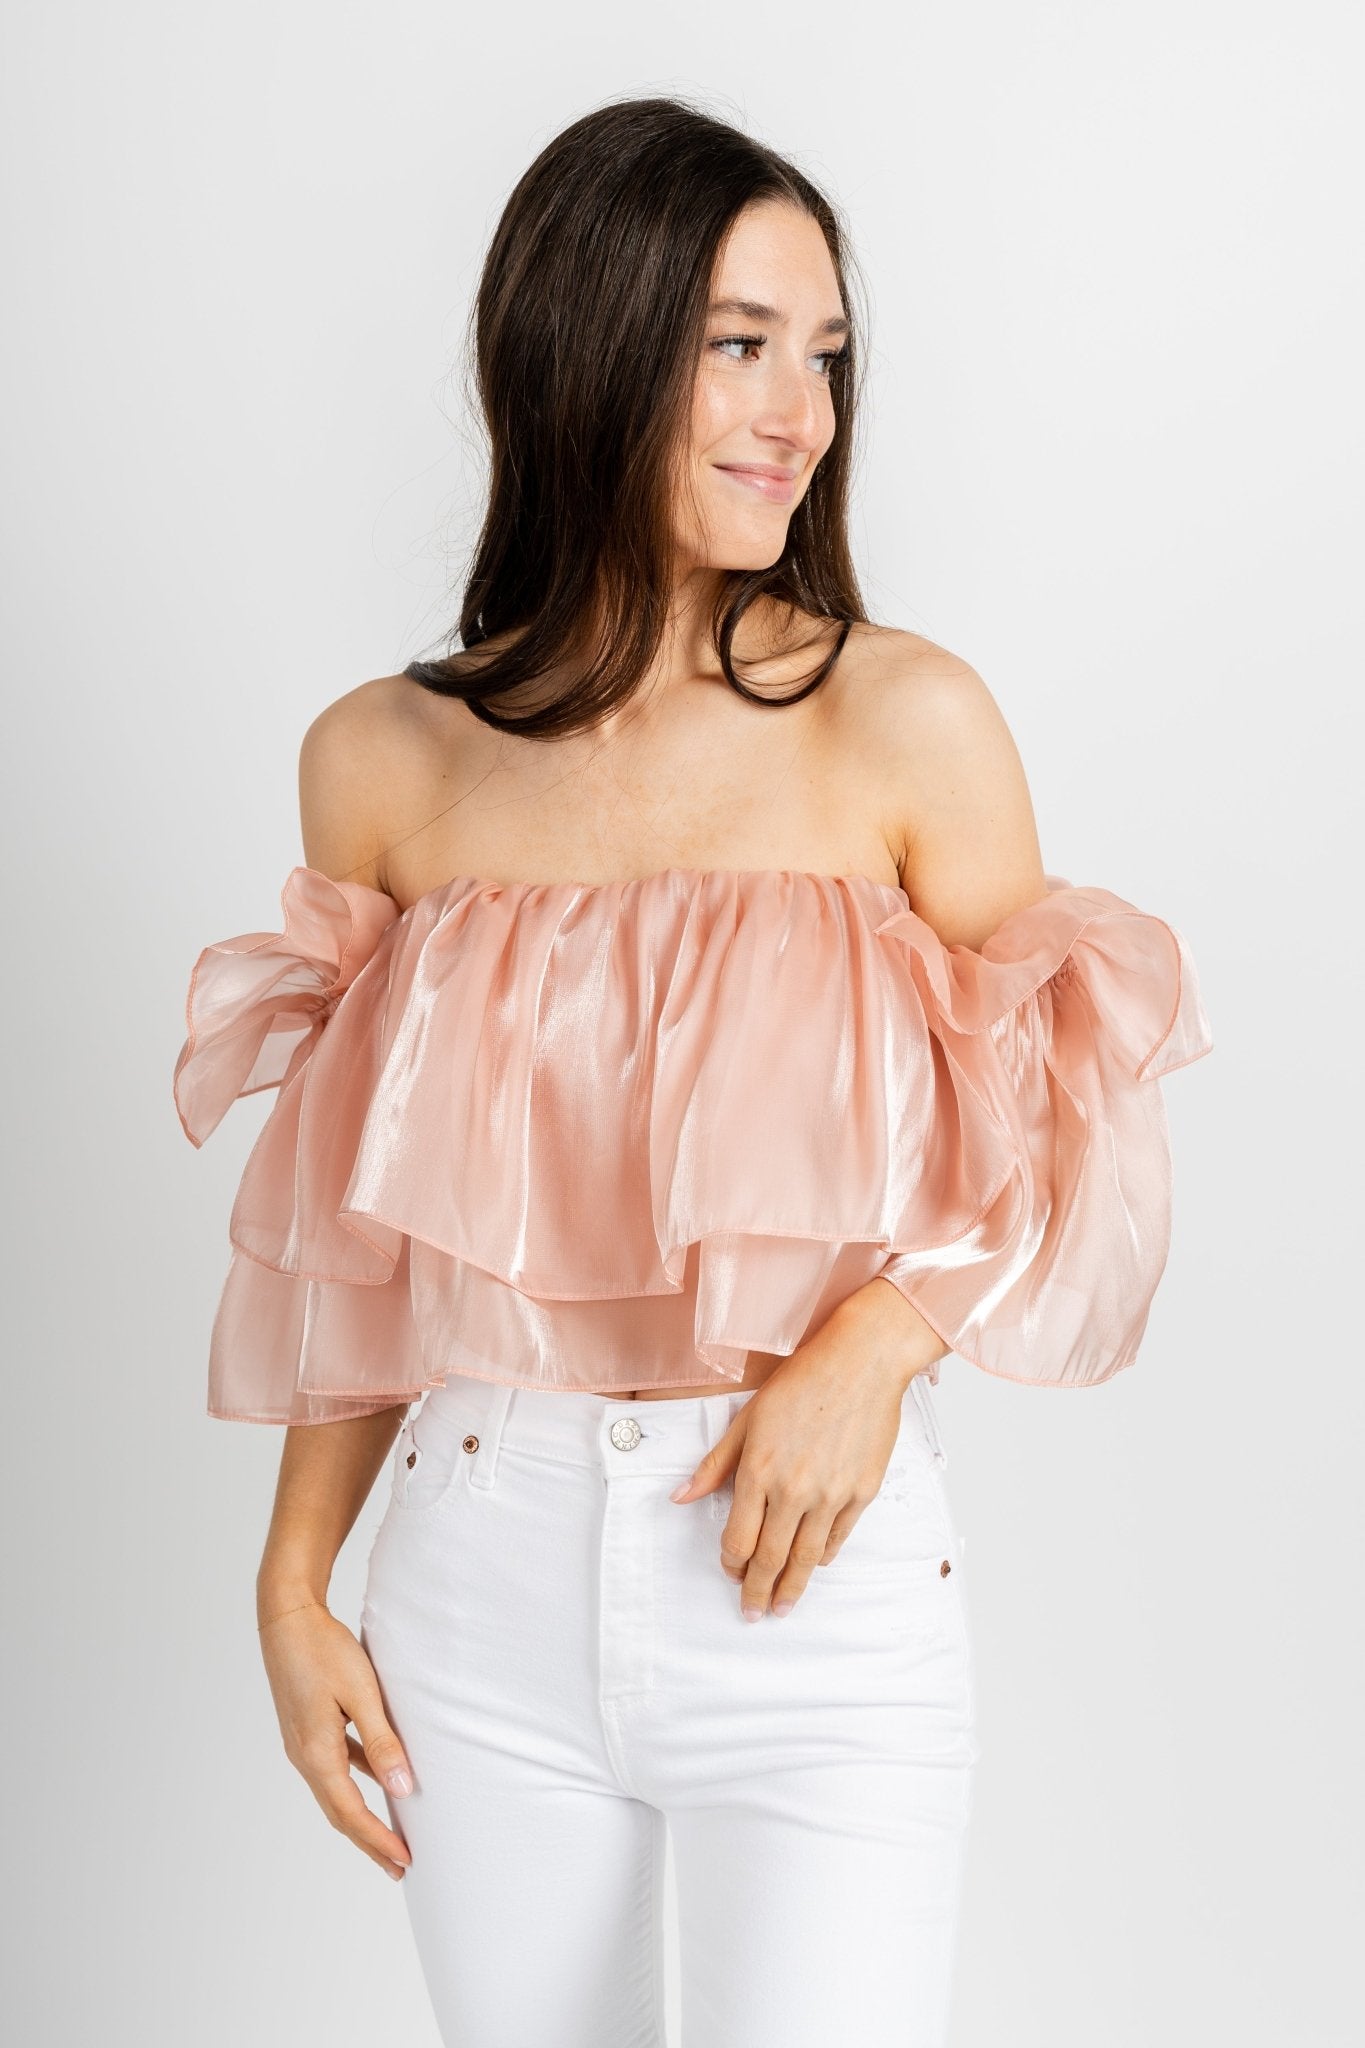 Ruffle off shoulder top blush - Trendy Top - Fun Easter Looks at Lush Fashion Lounge Boutique in Oklahoma